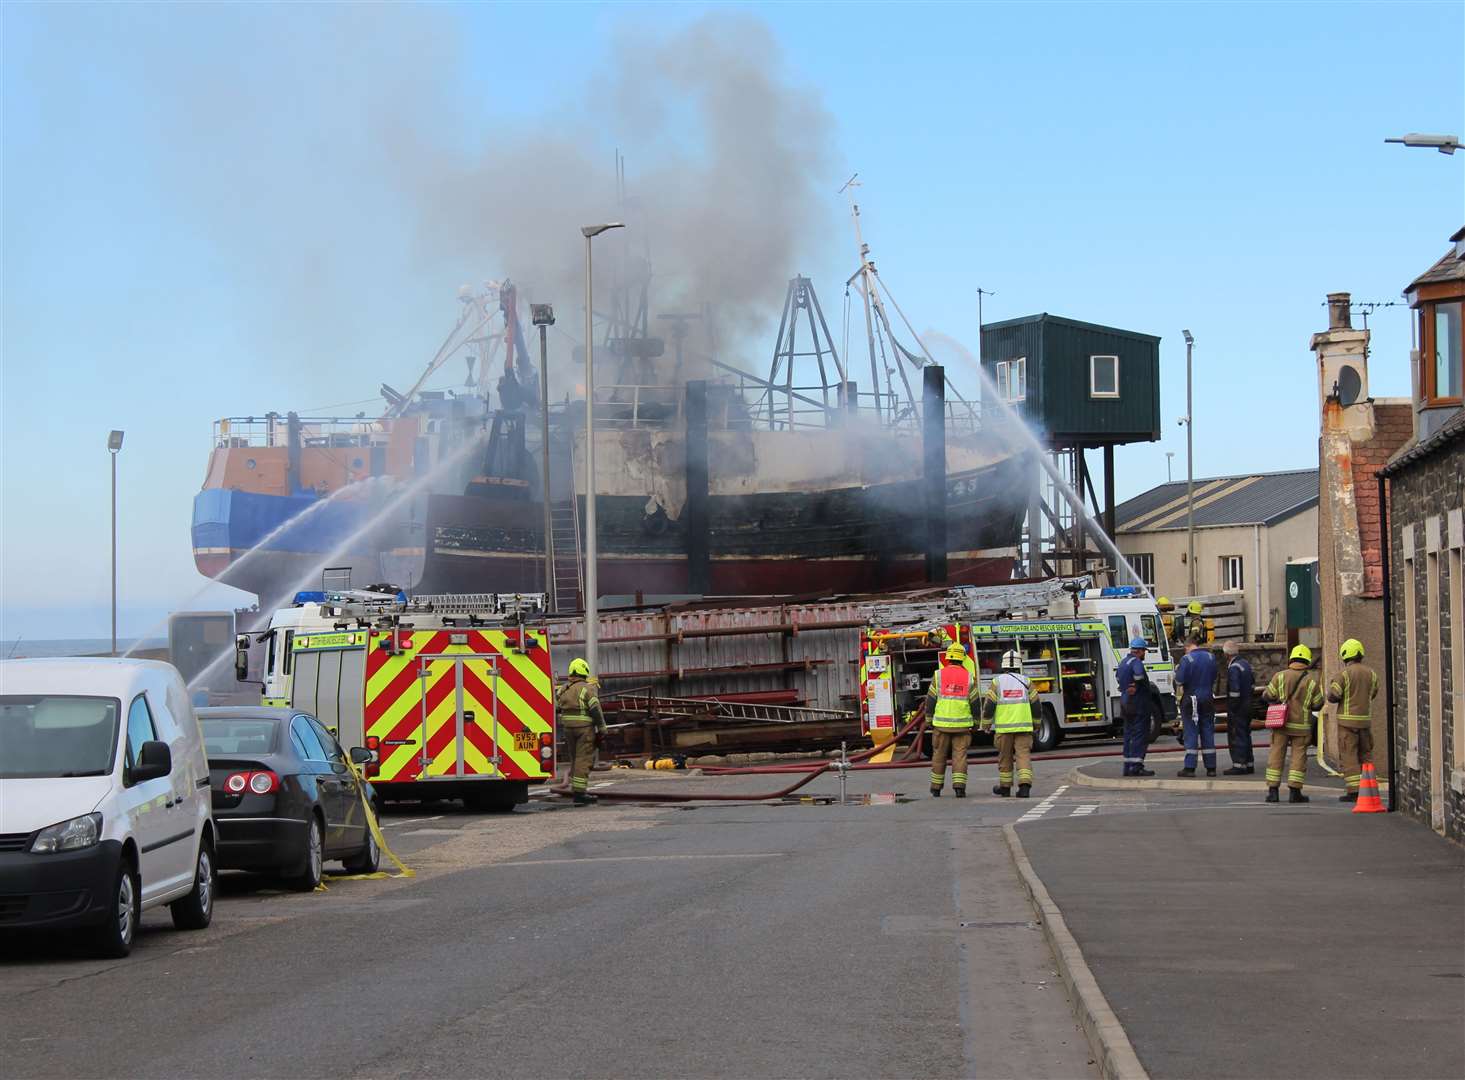 The boat went on fire at the Macduff Harbour slipway.